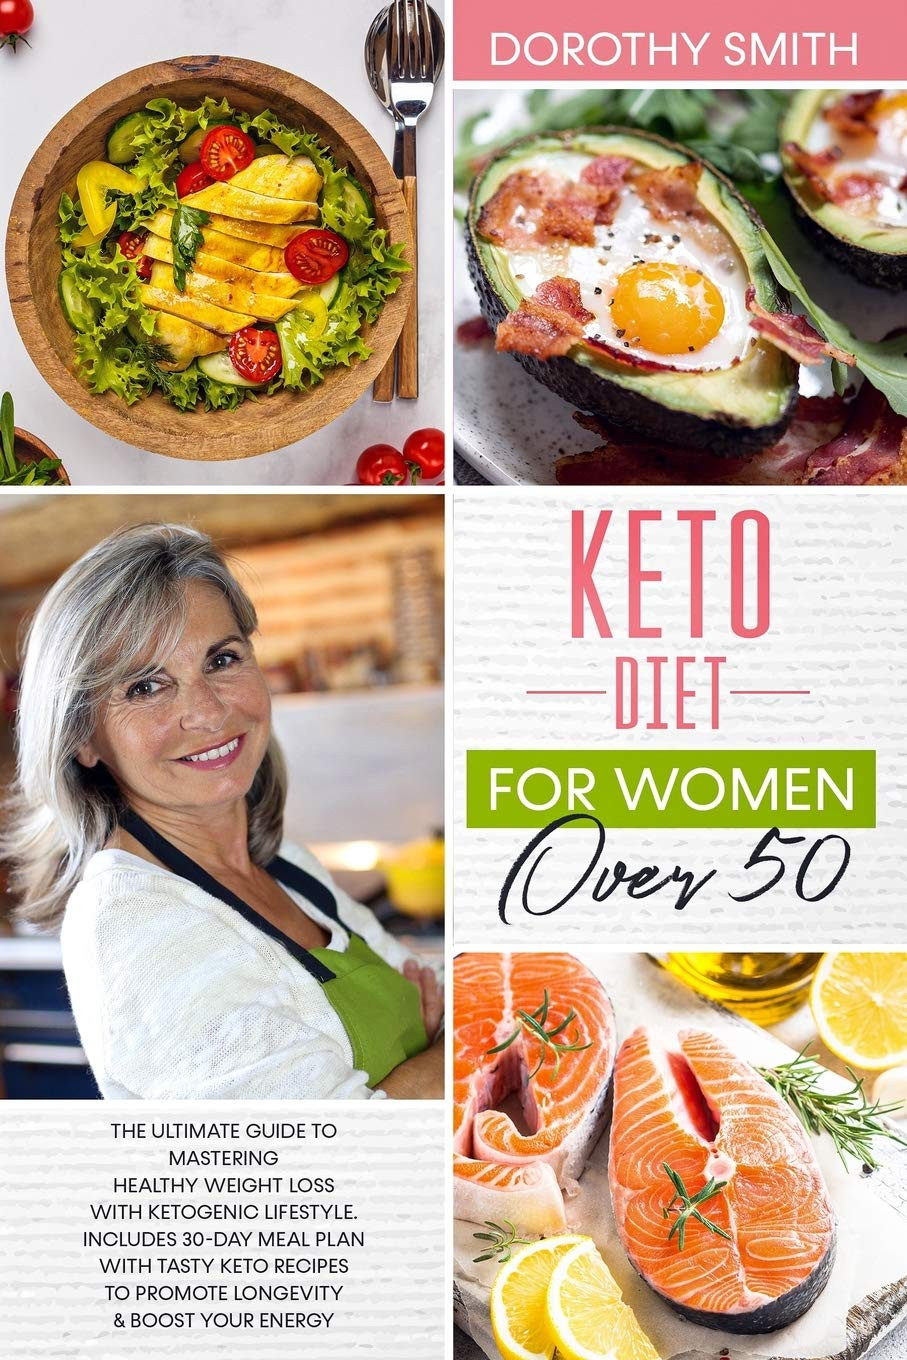 Keto Diet Plan For Women Over 50
 Keto Diet for Women Over 50 The Ultimate Guide to